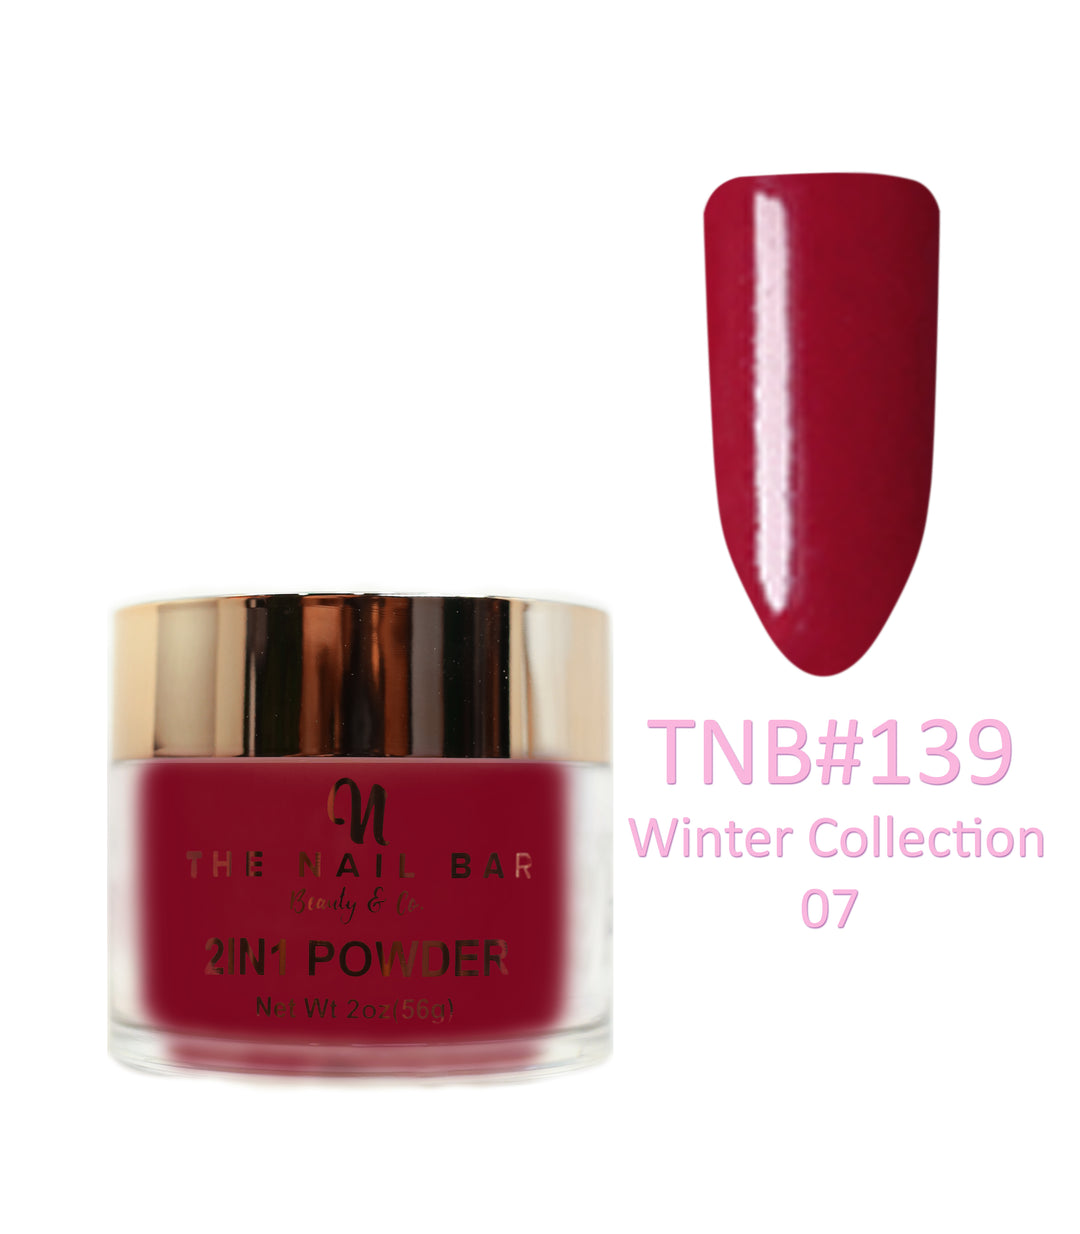 2-In-1 Dipping/Acrylic colour powder (2oz) -Winter collection 07 - The Nail Bar Beauty & Co.